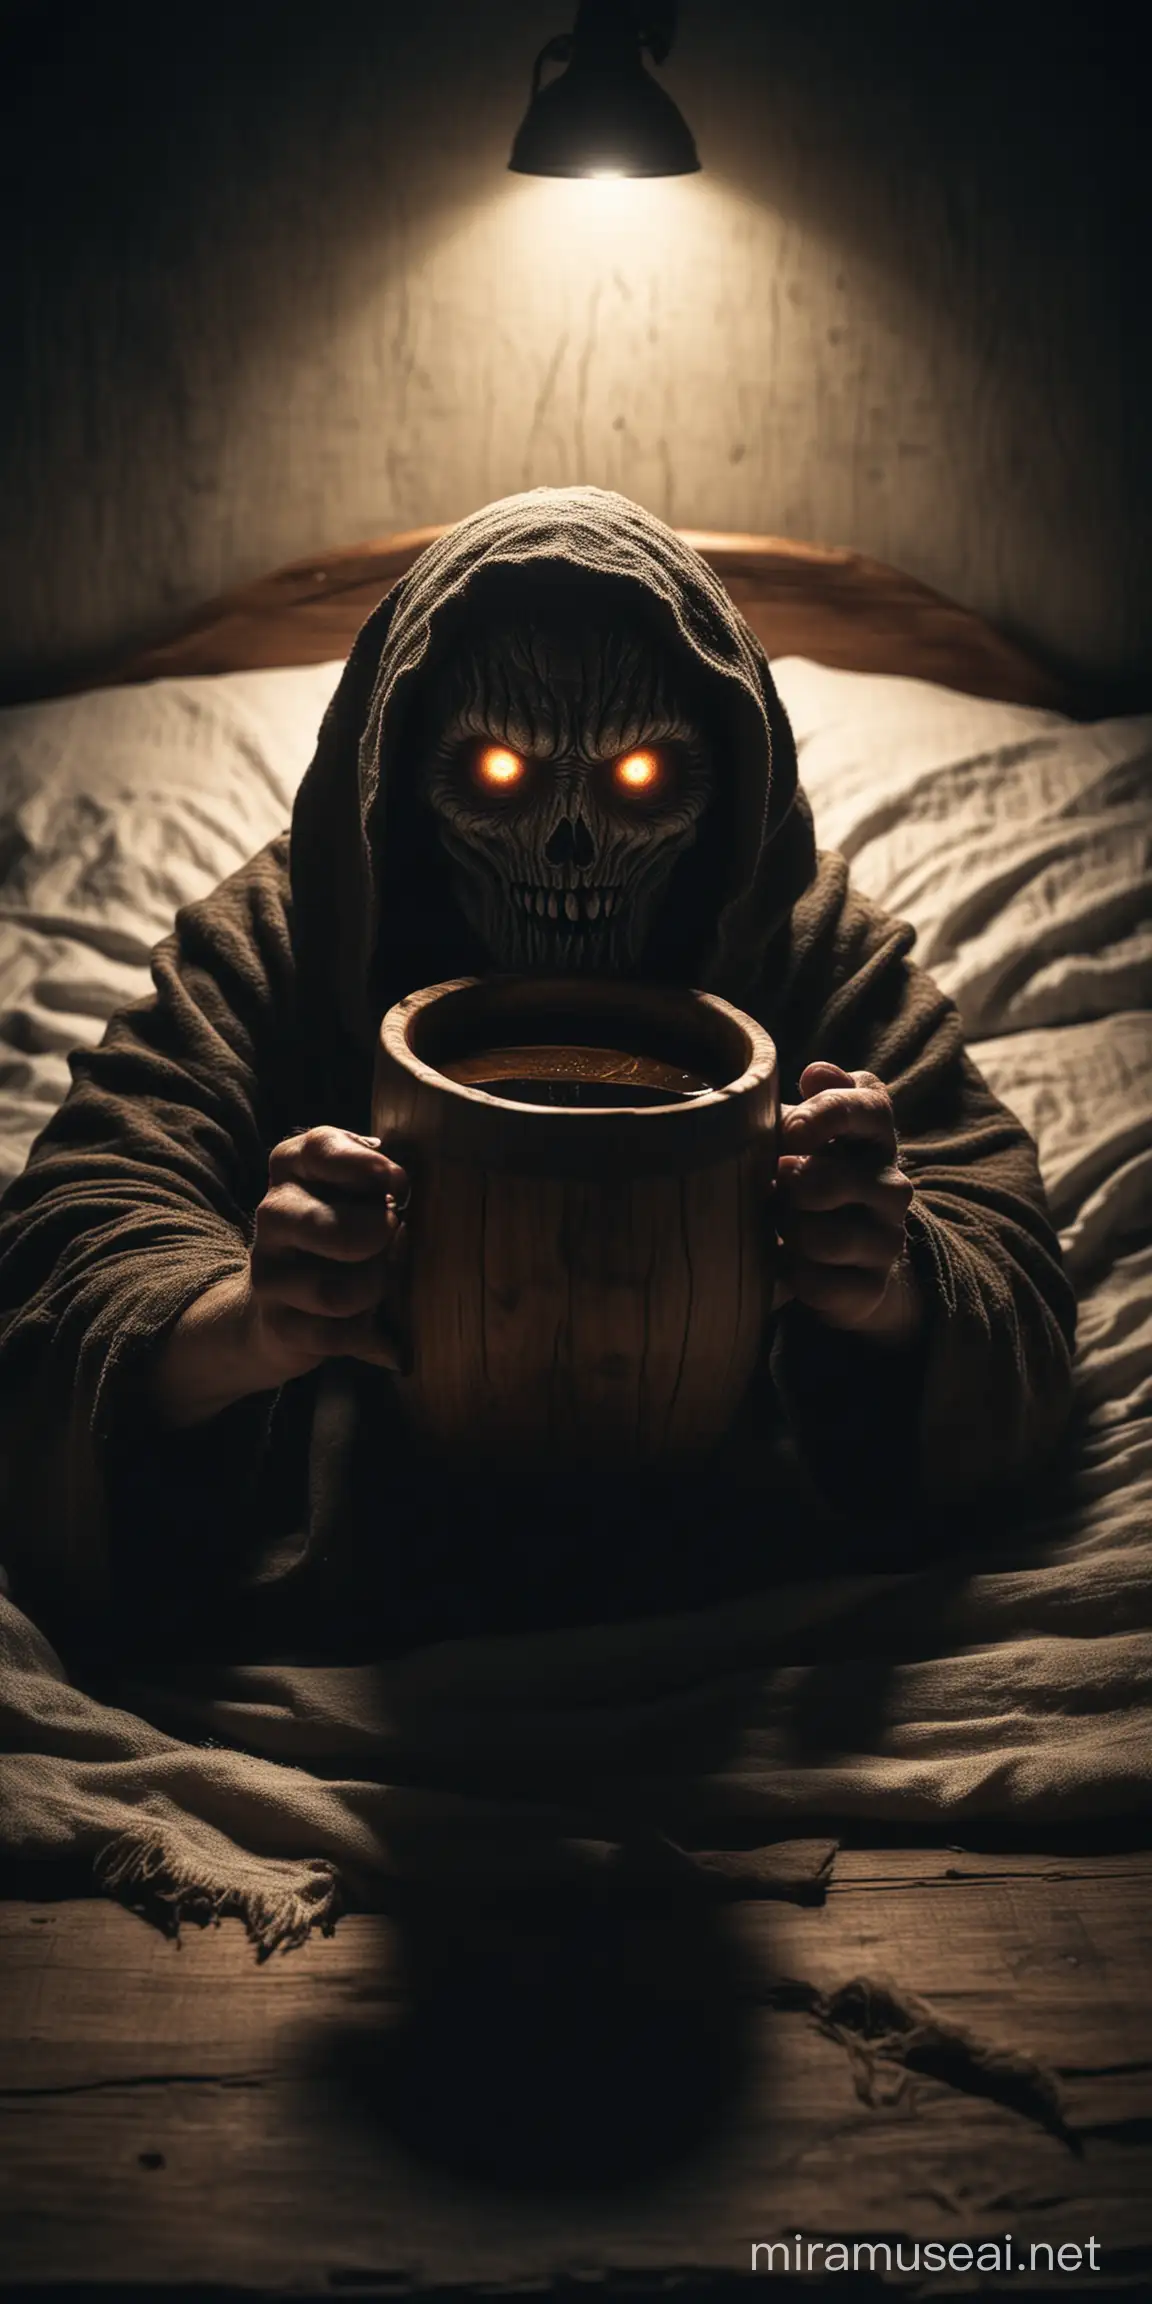 grim glowing monster eyes under the bed in a dark room, his hands holds out a wooden mug of mead